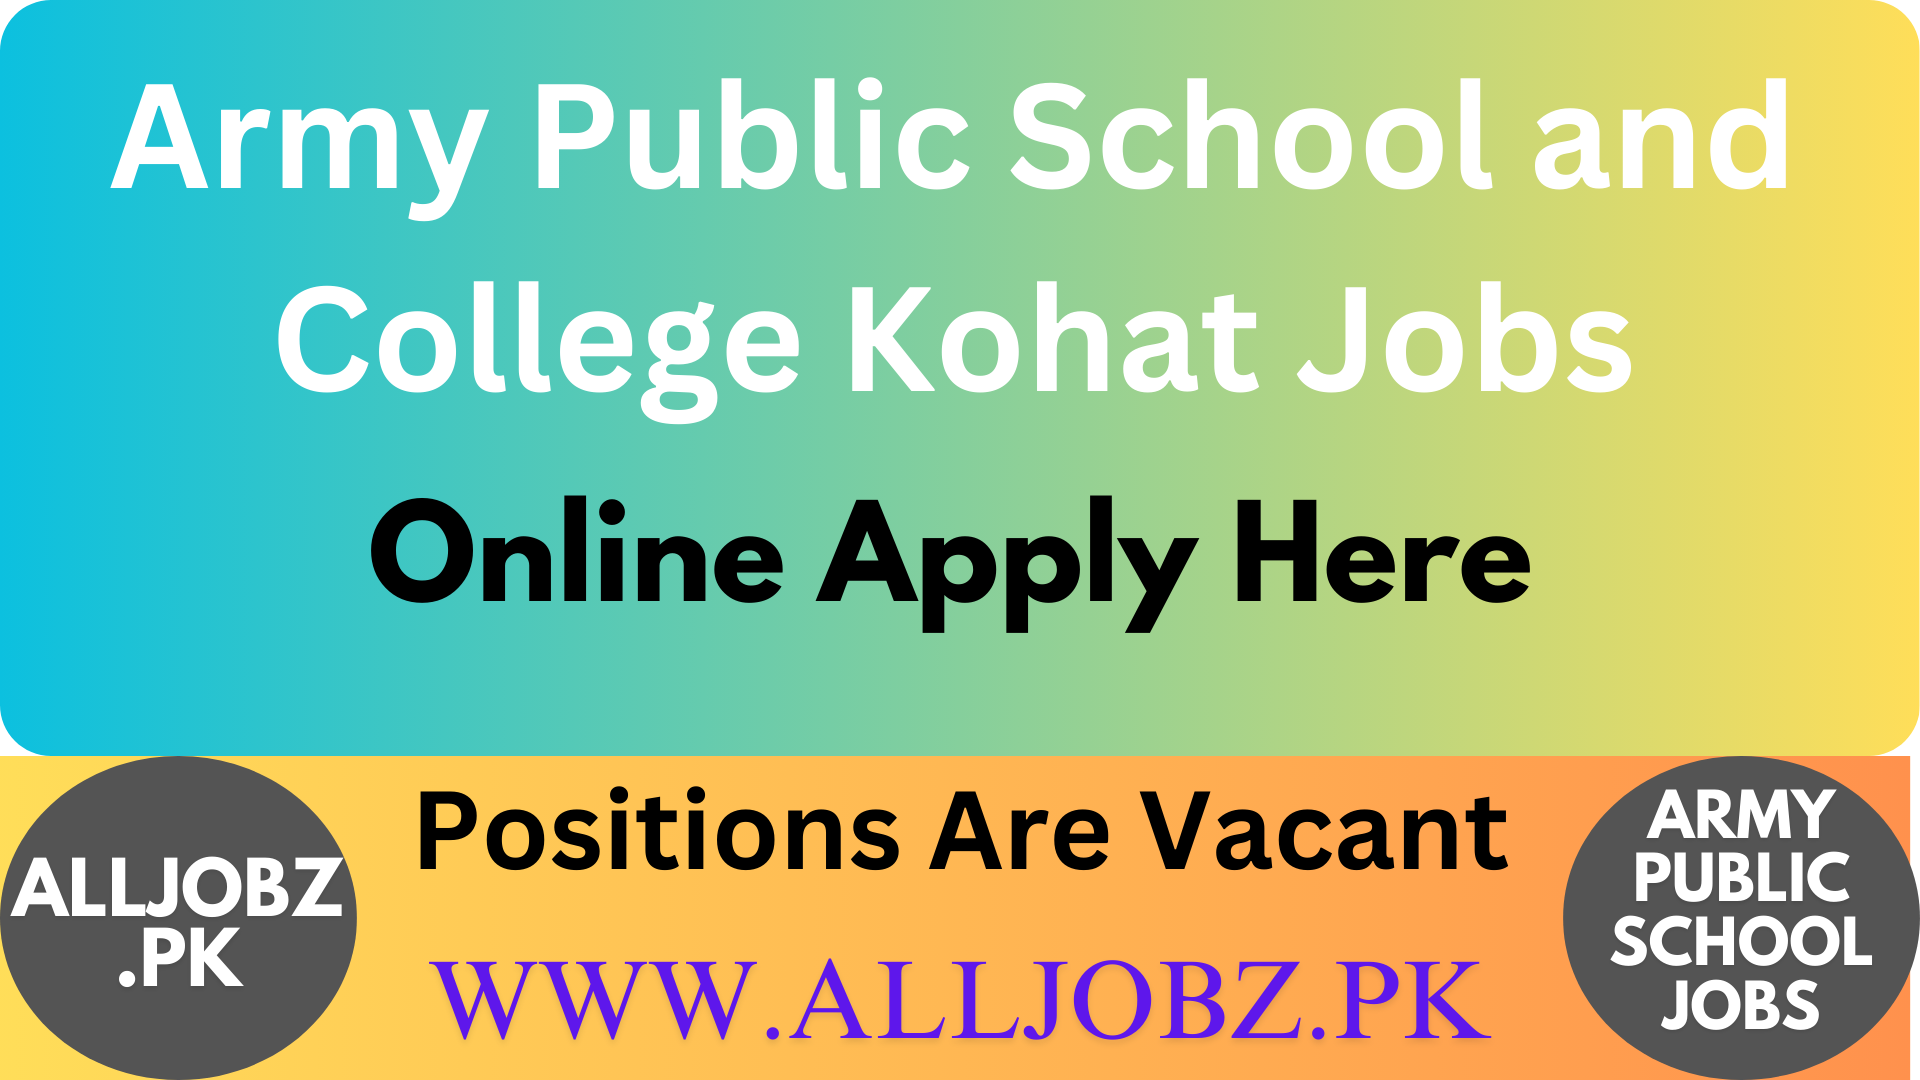 Army Public School And College Kohat Jobs